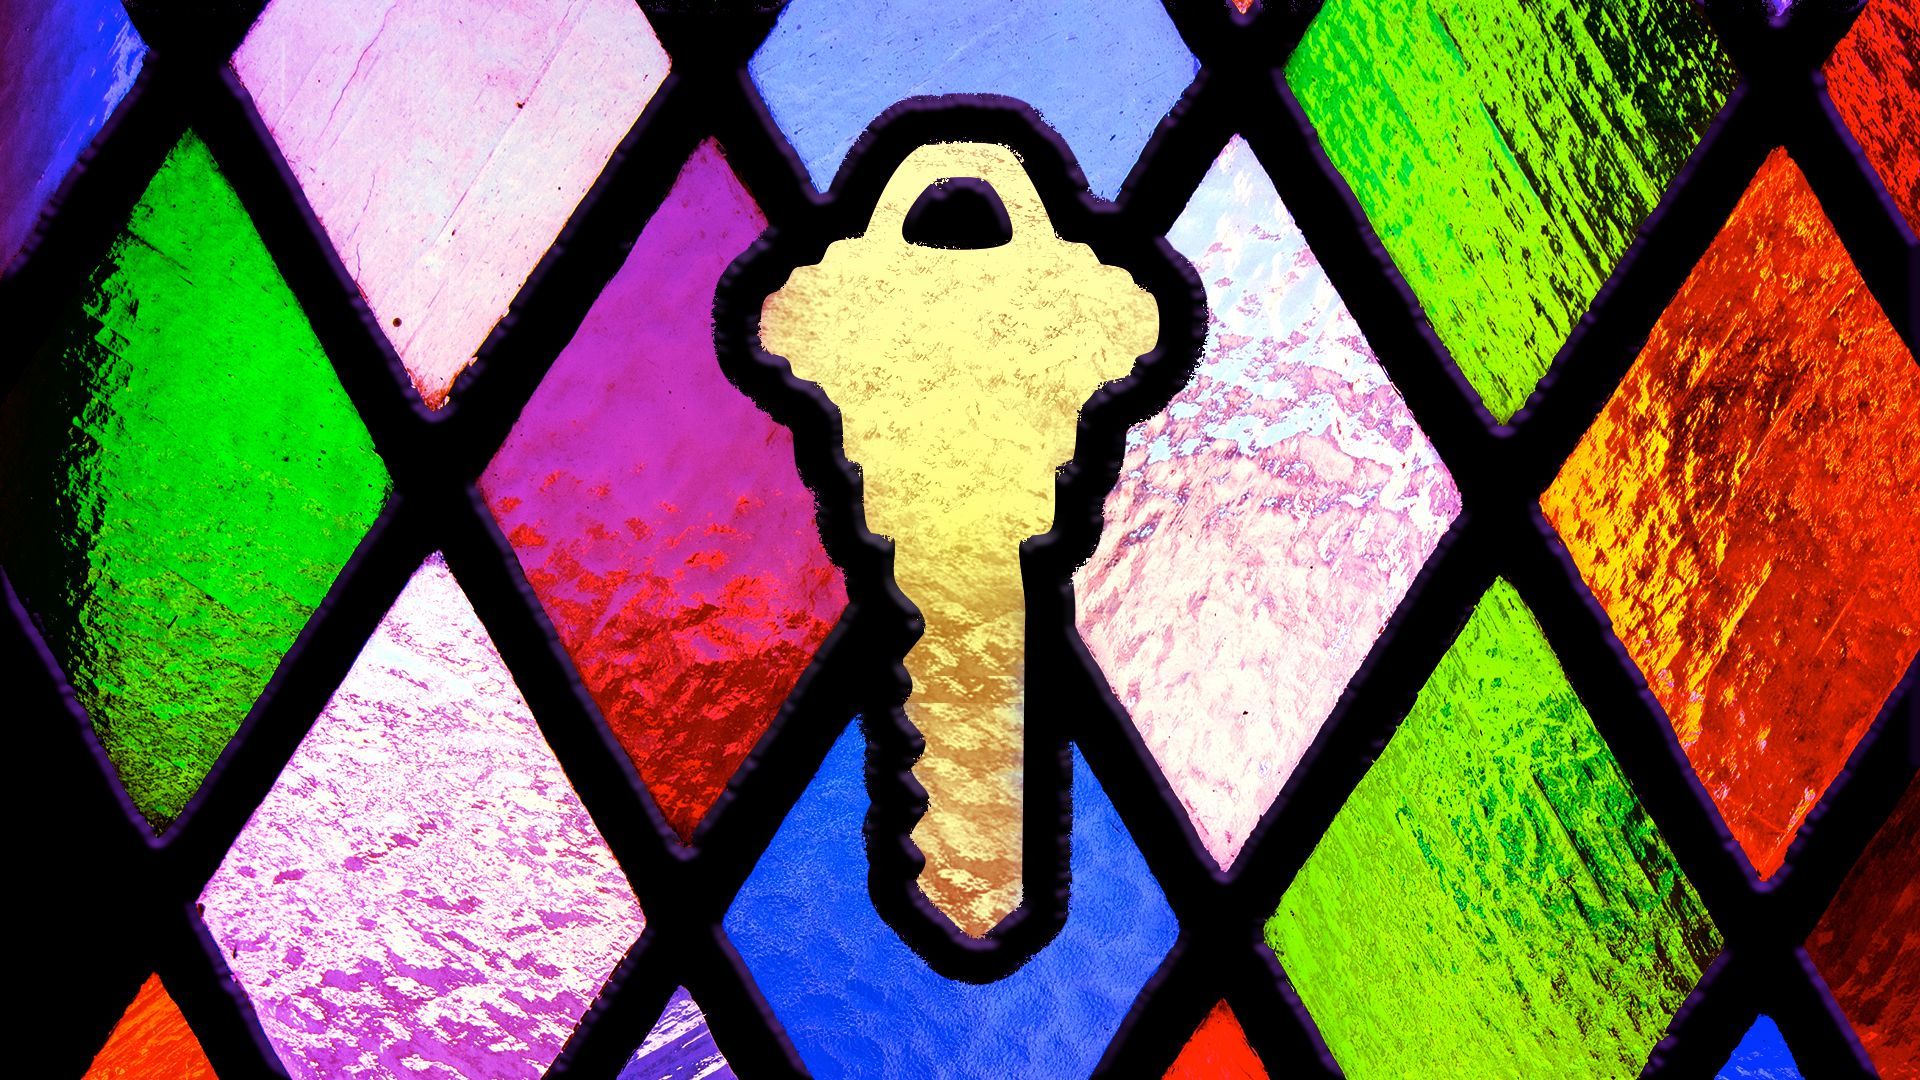 Illustration of a stained-glass window with a key design in it.